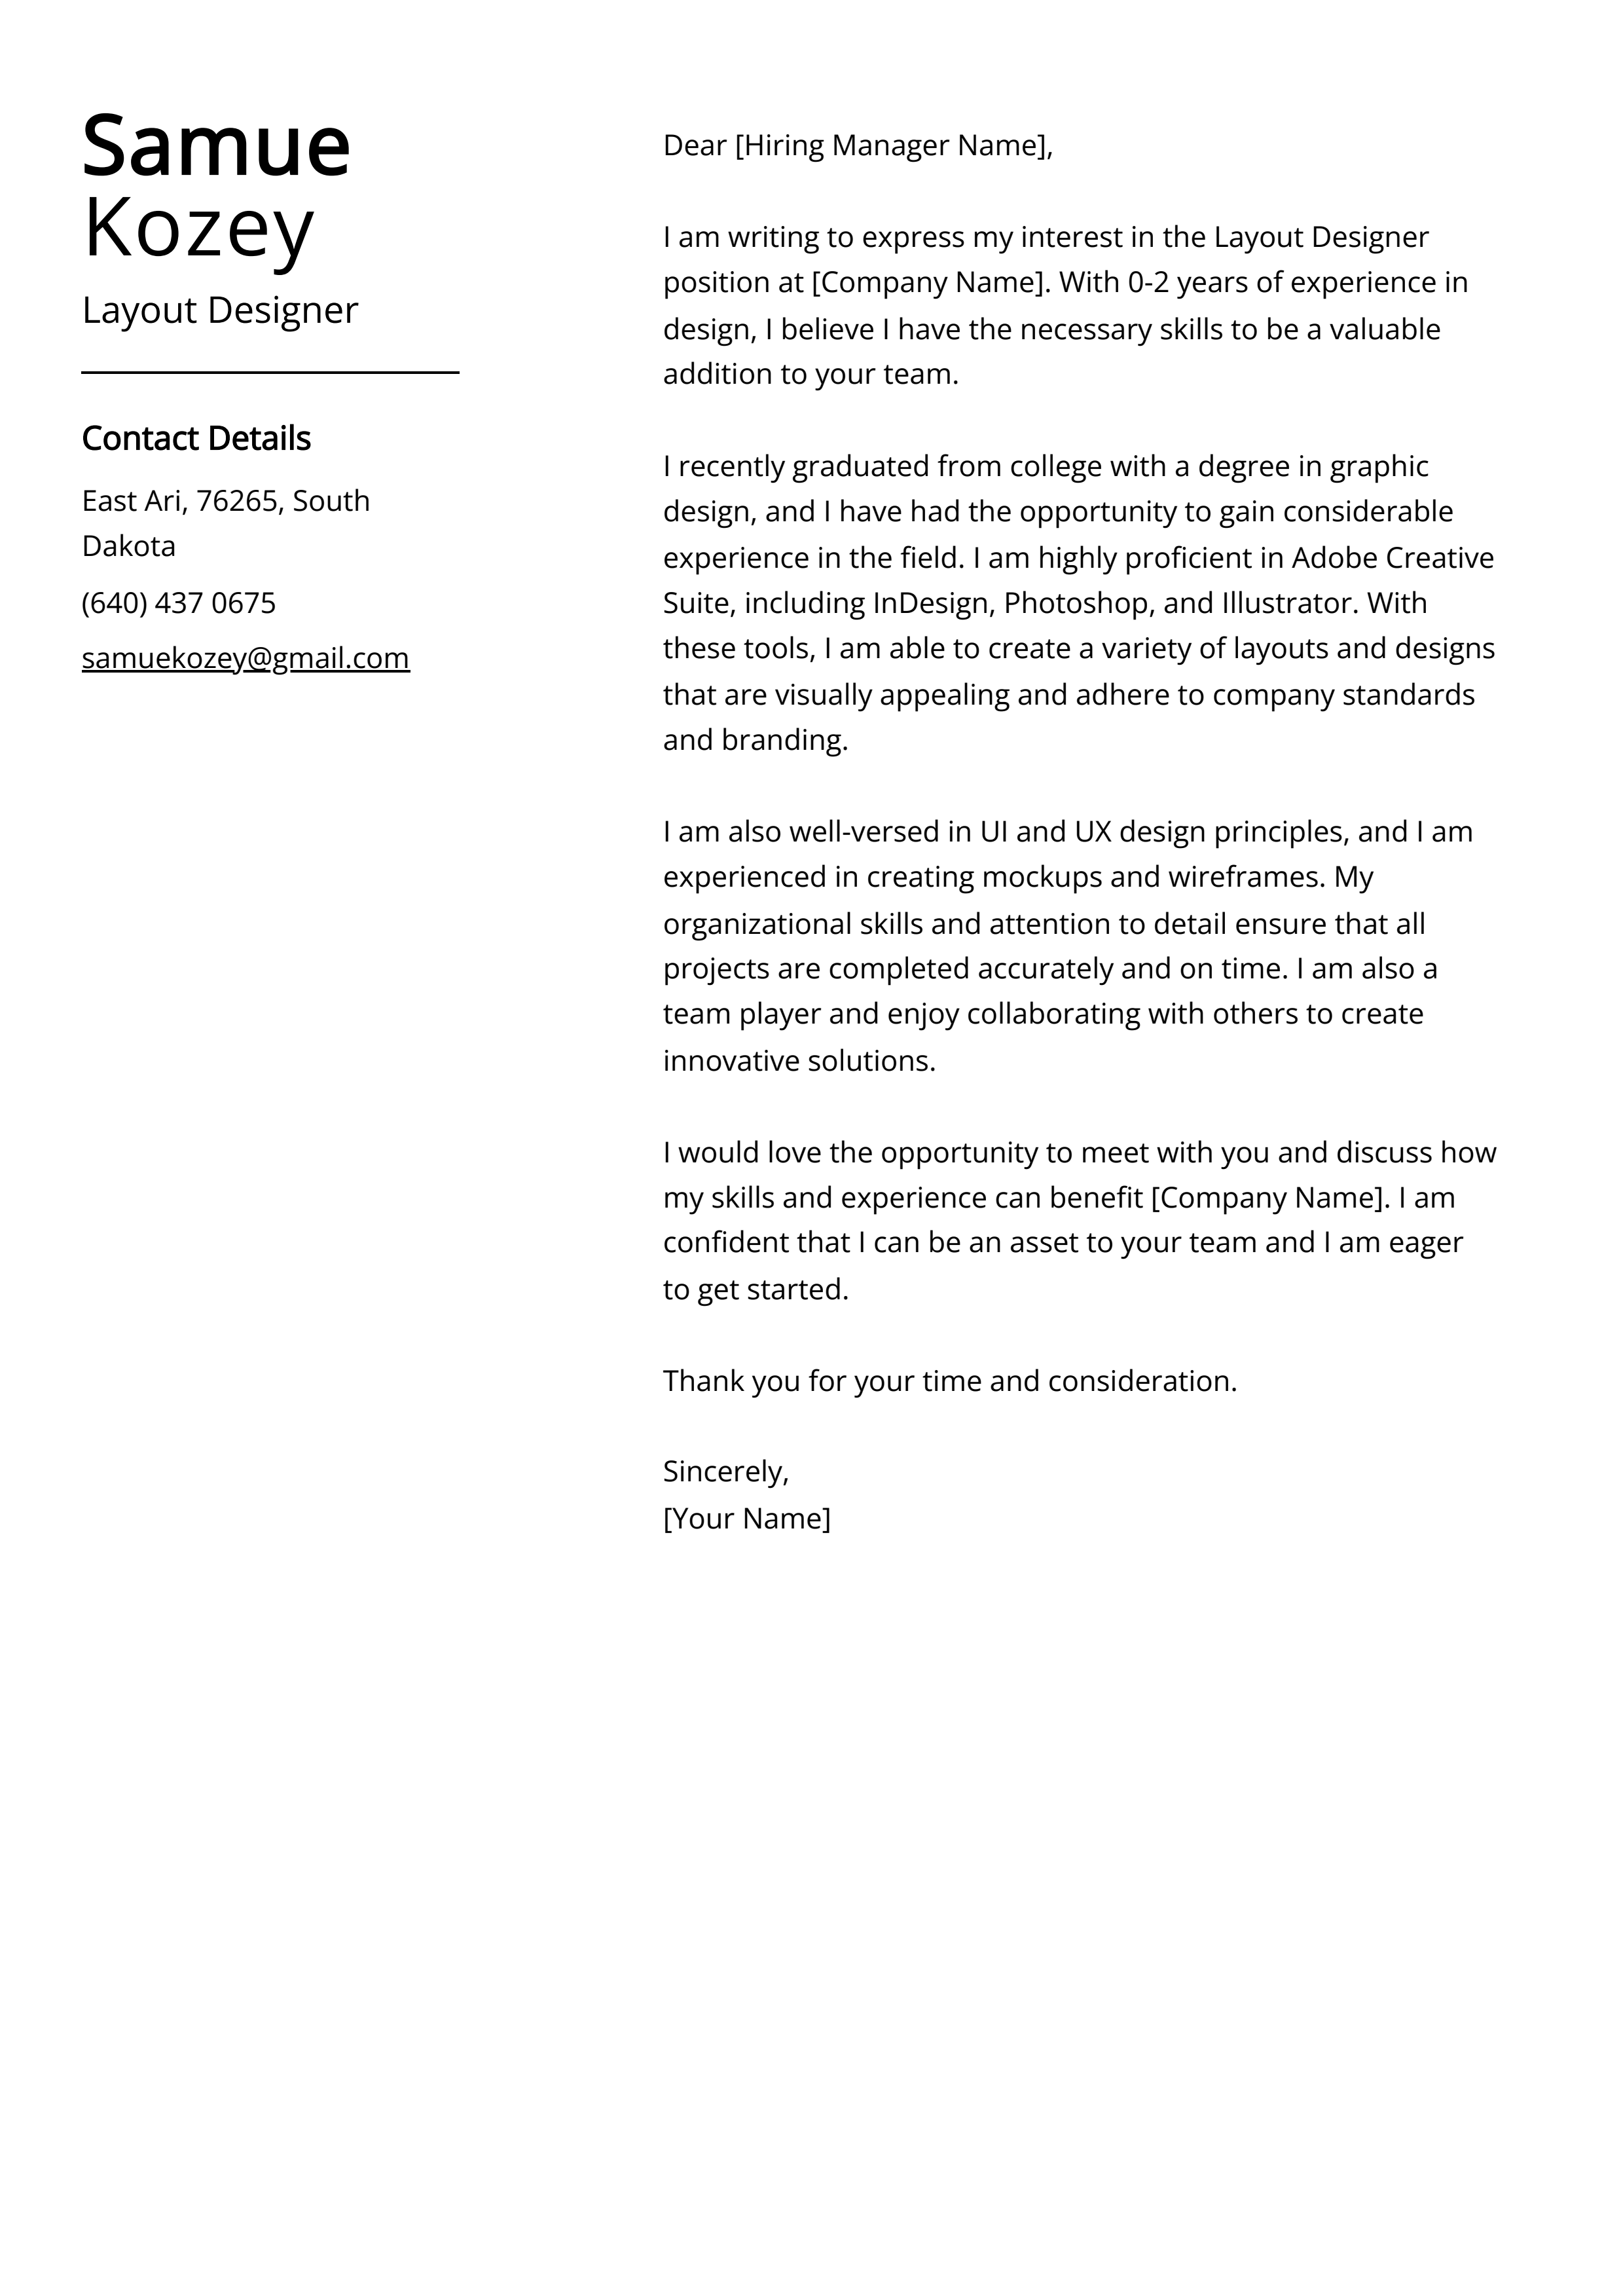 Layout Designer Cover Letter Example